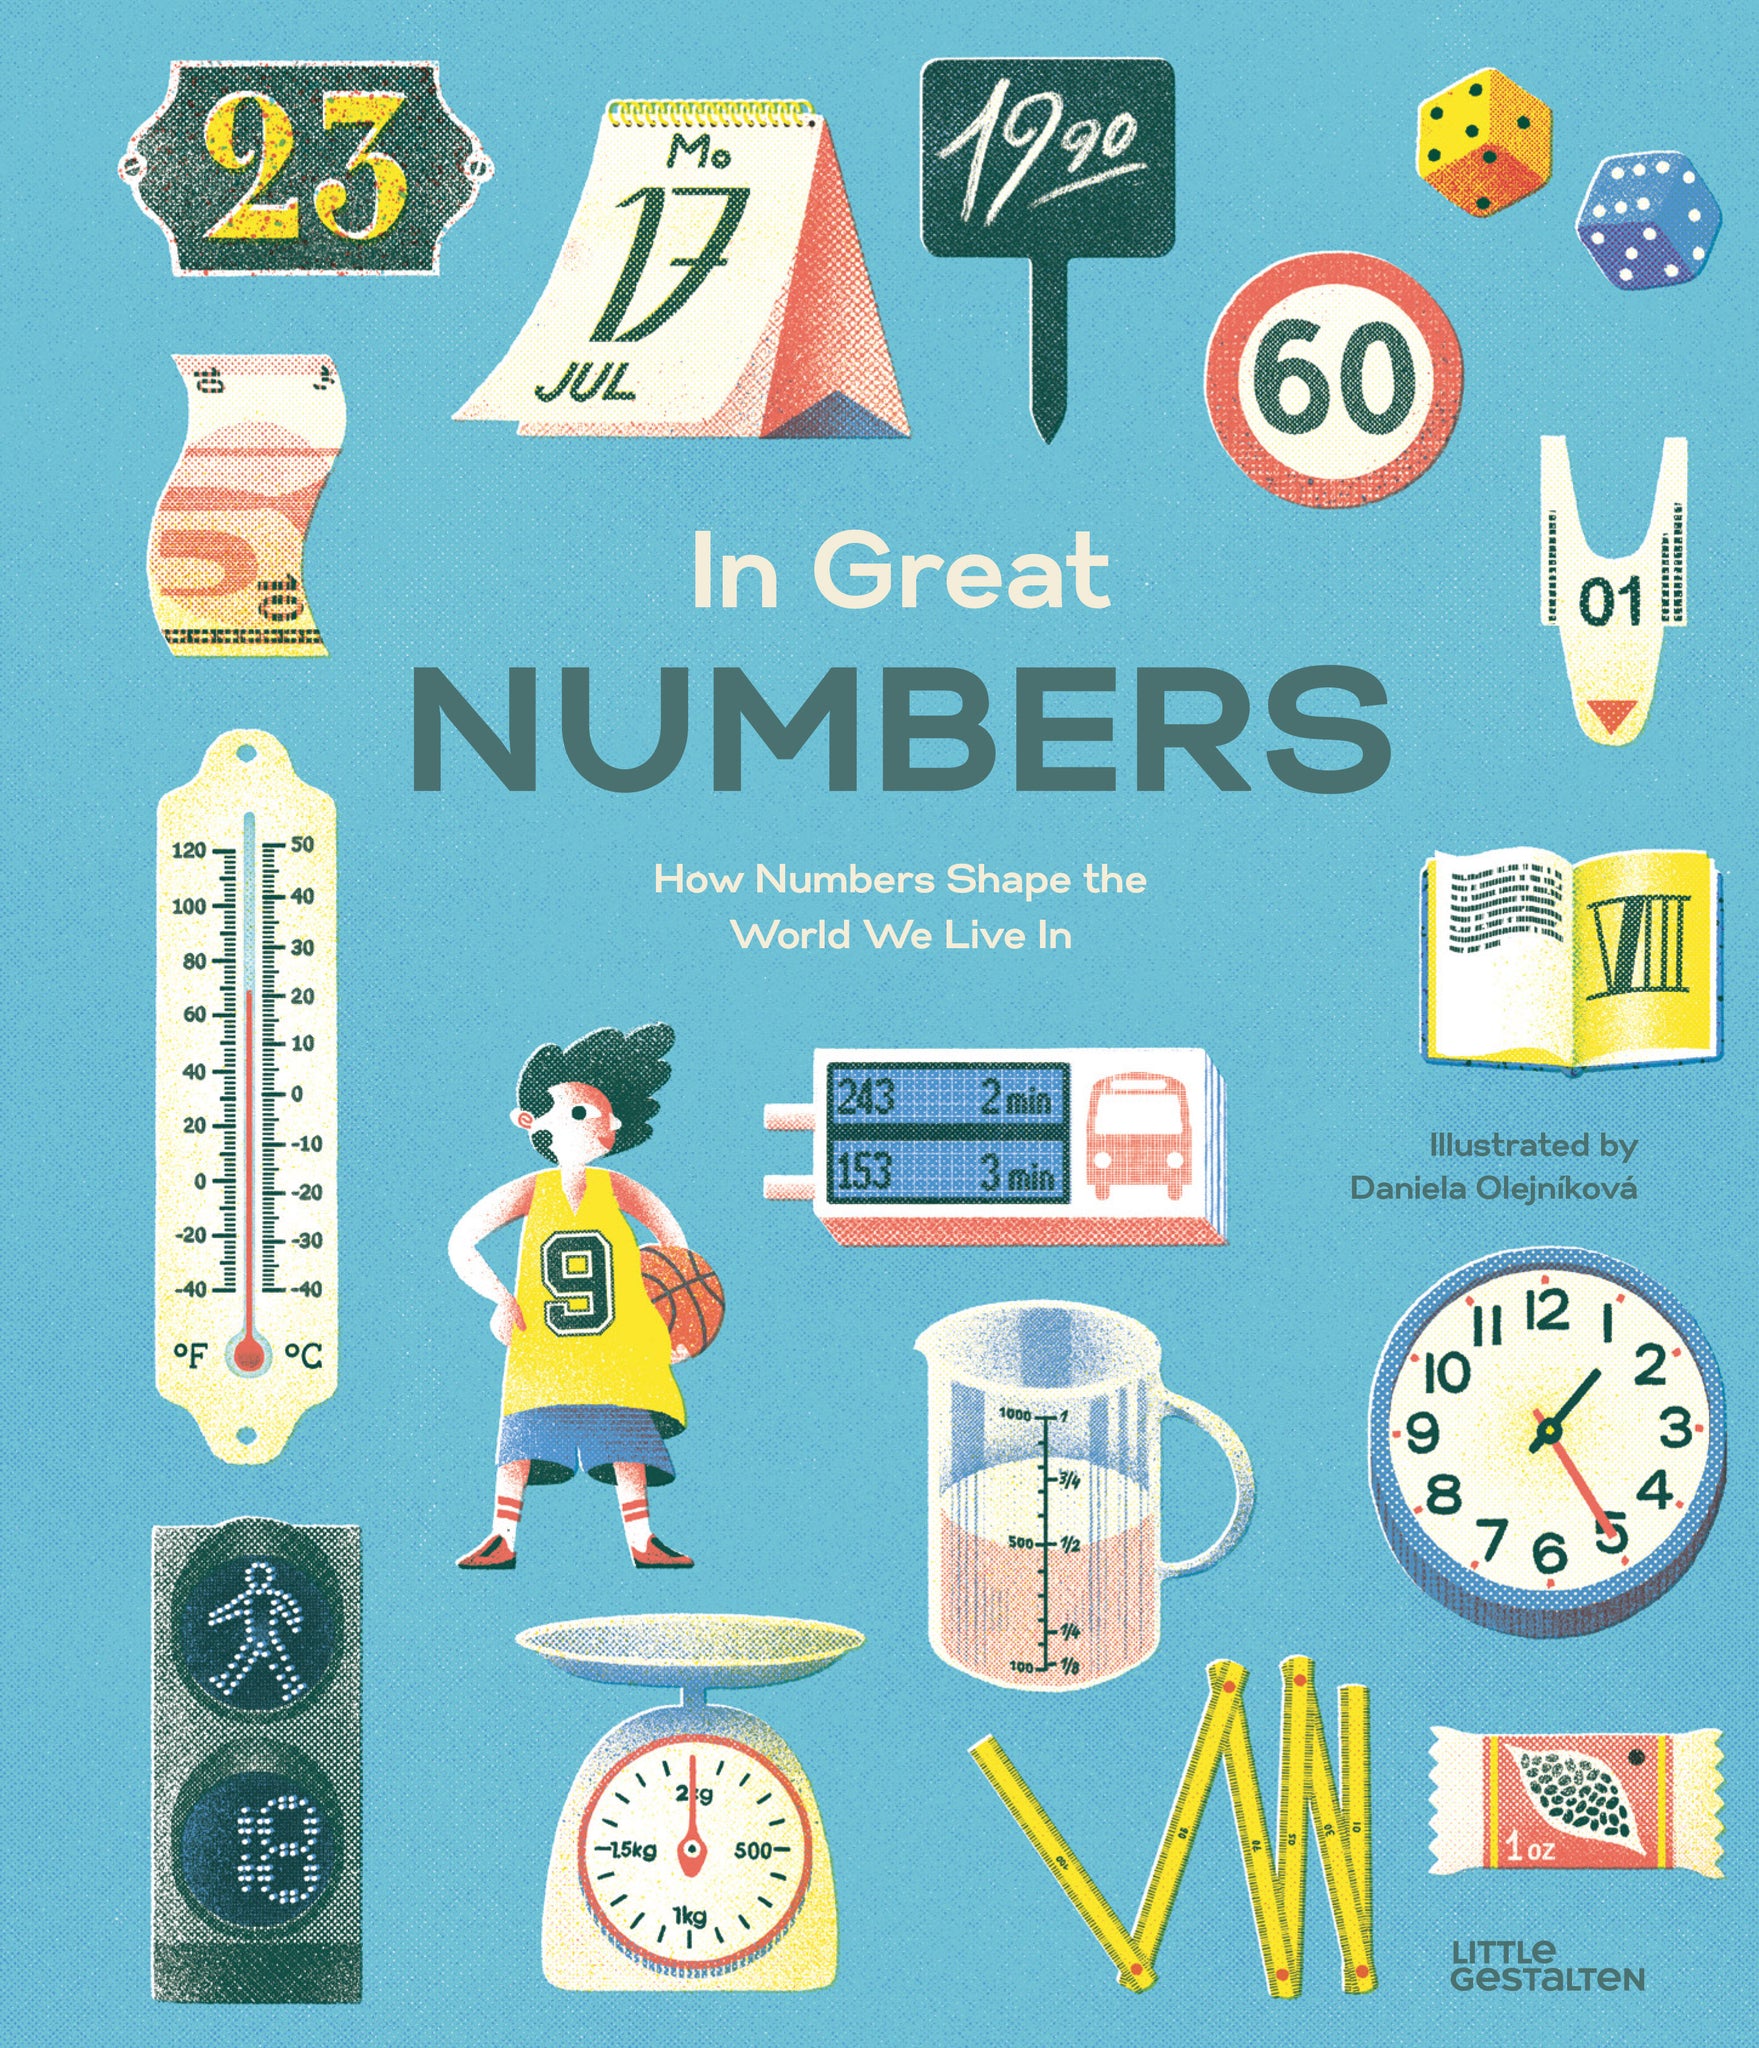 In Great Numbers: How Numbers Shape the World We Live In